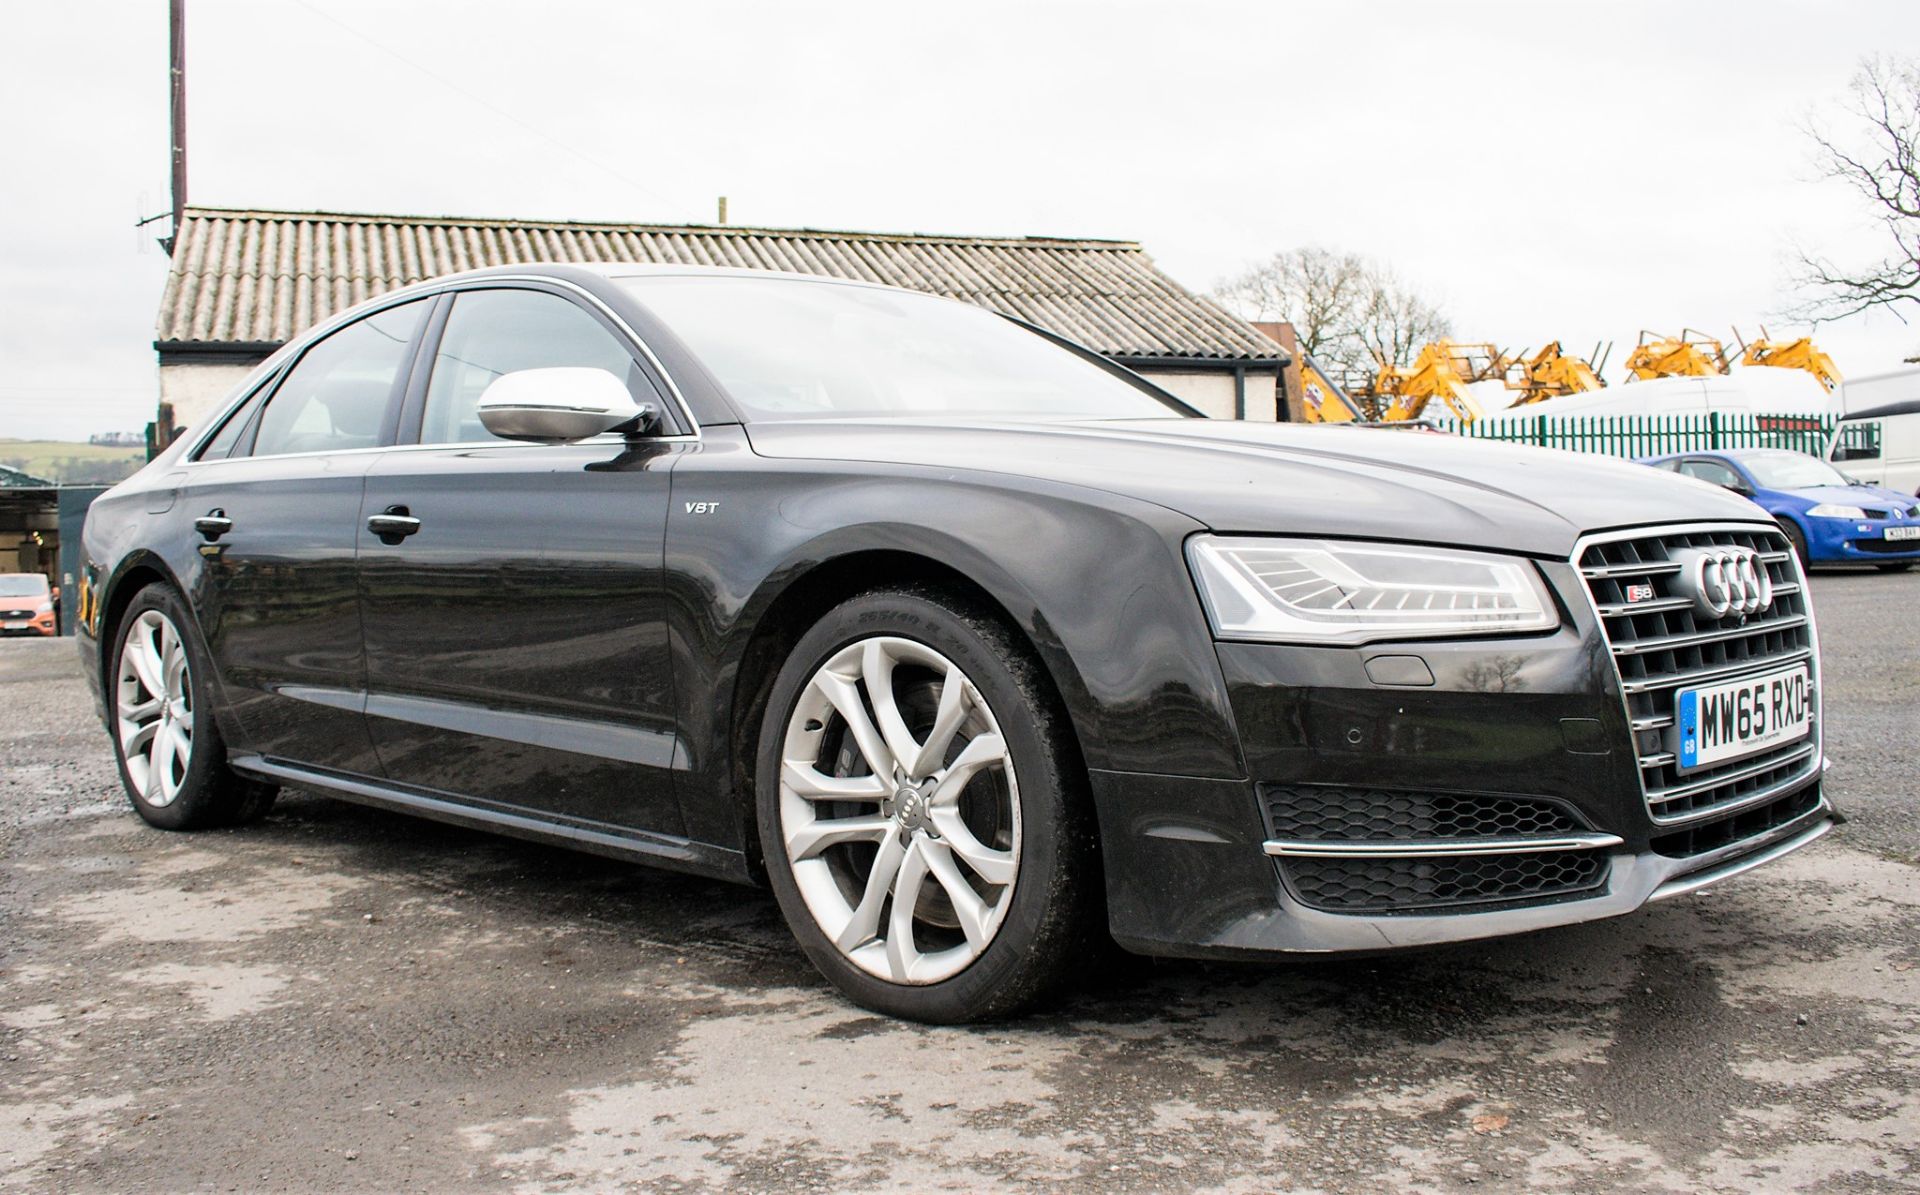 Audi S8 V8 TFSi Quattro Auto 4 door saloon car Registration Number: MW65 RXD Date of Registration: - Image 2 of 20